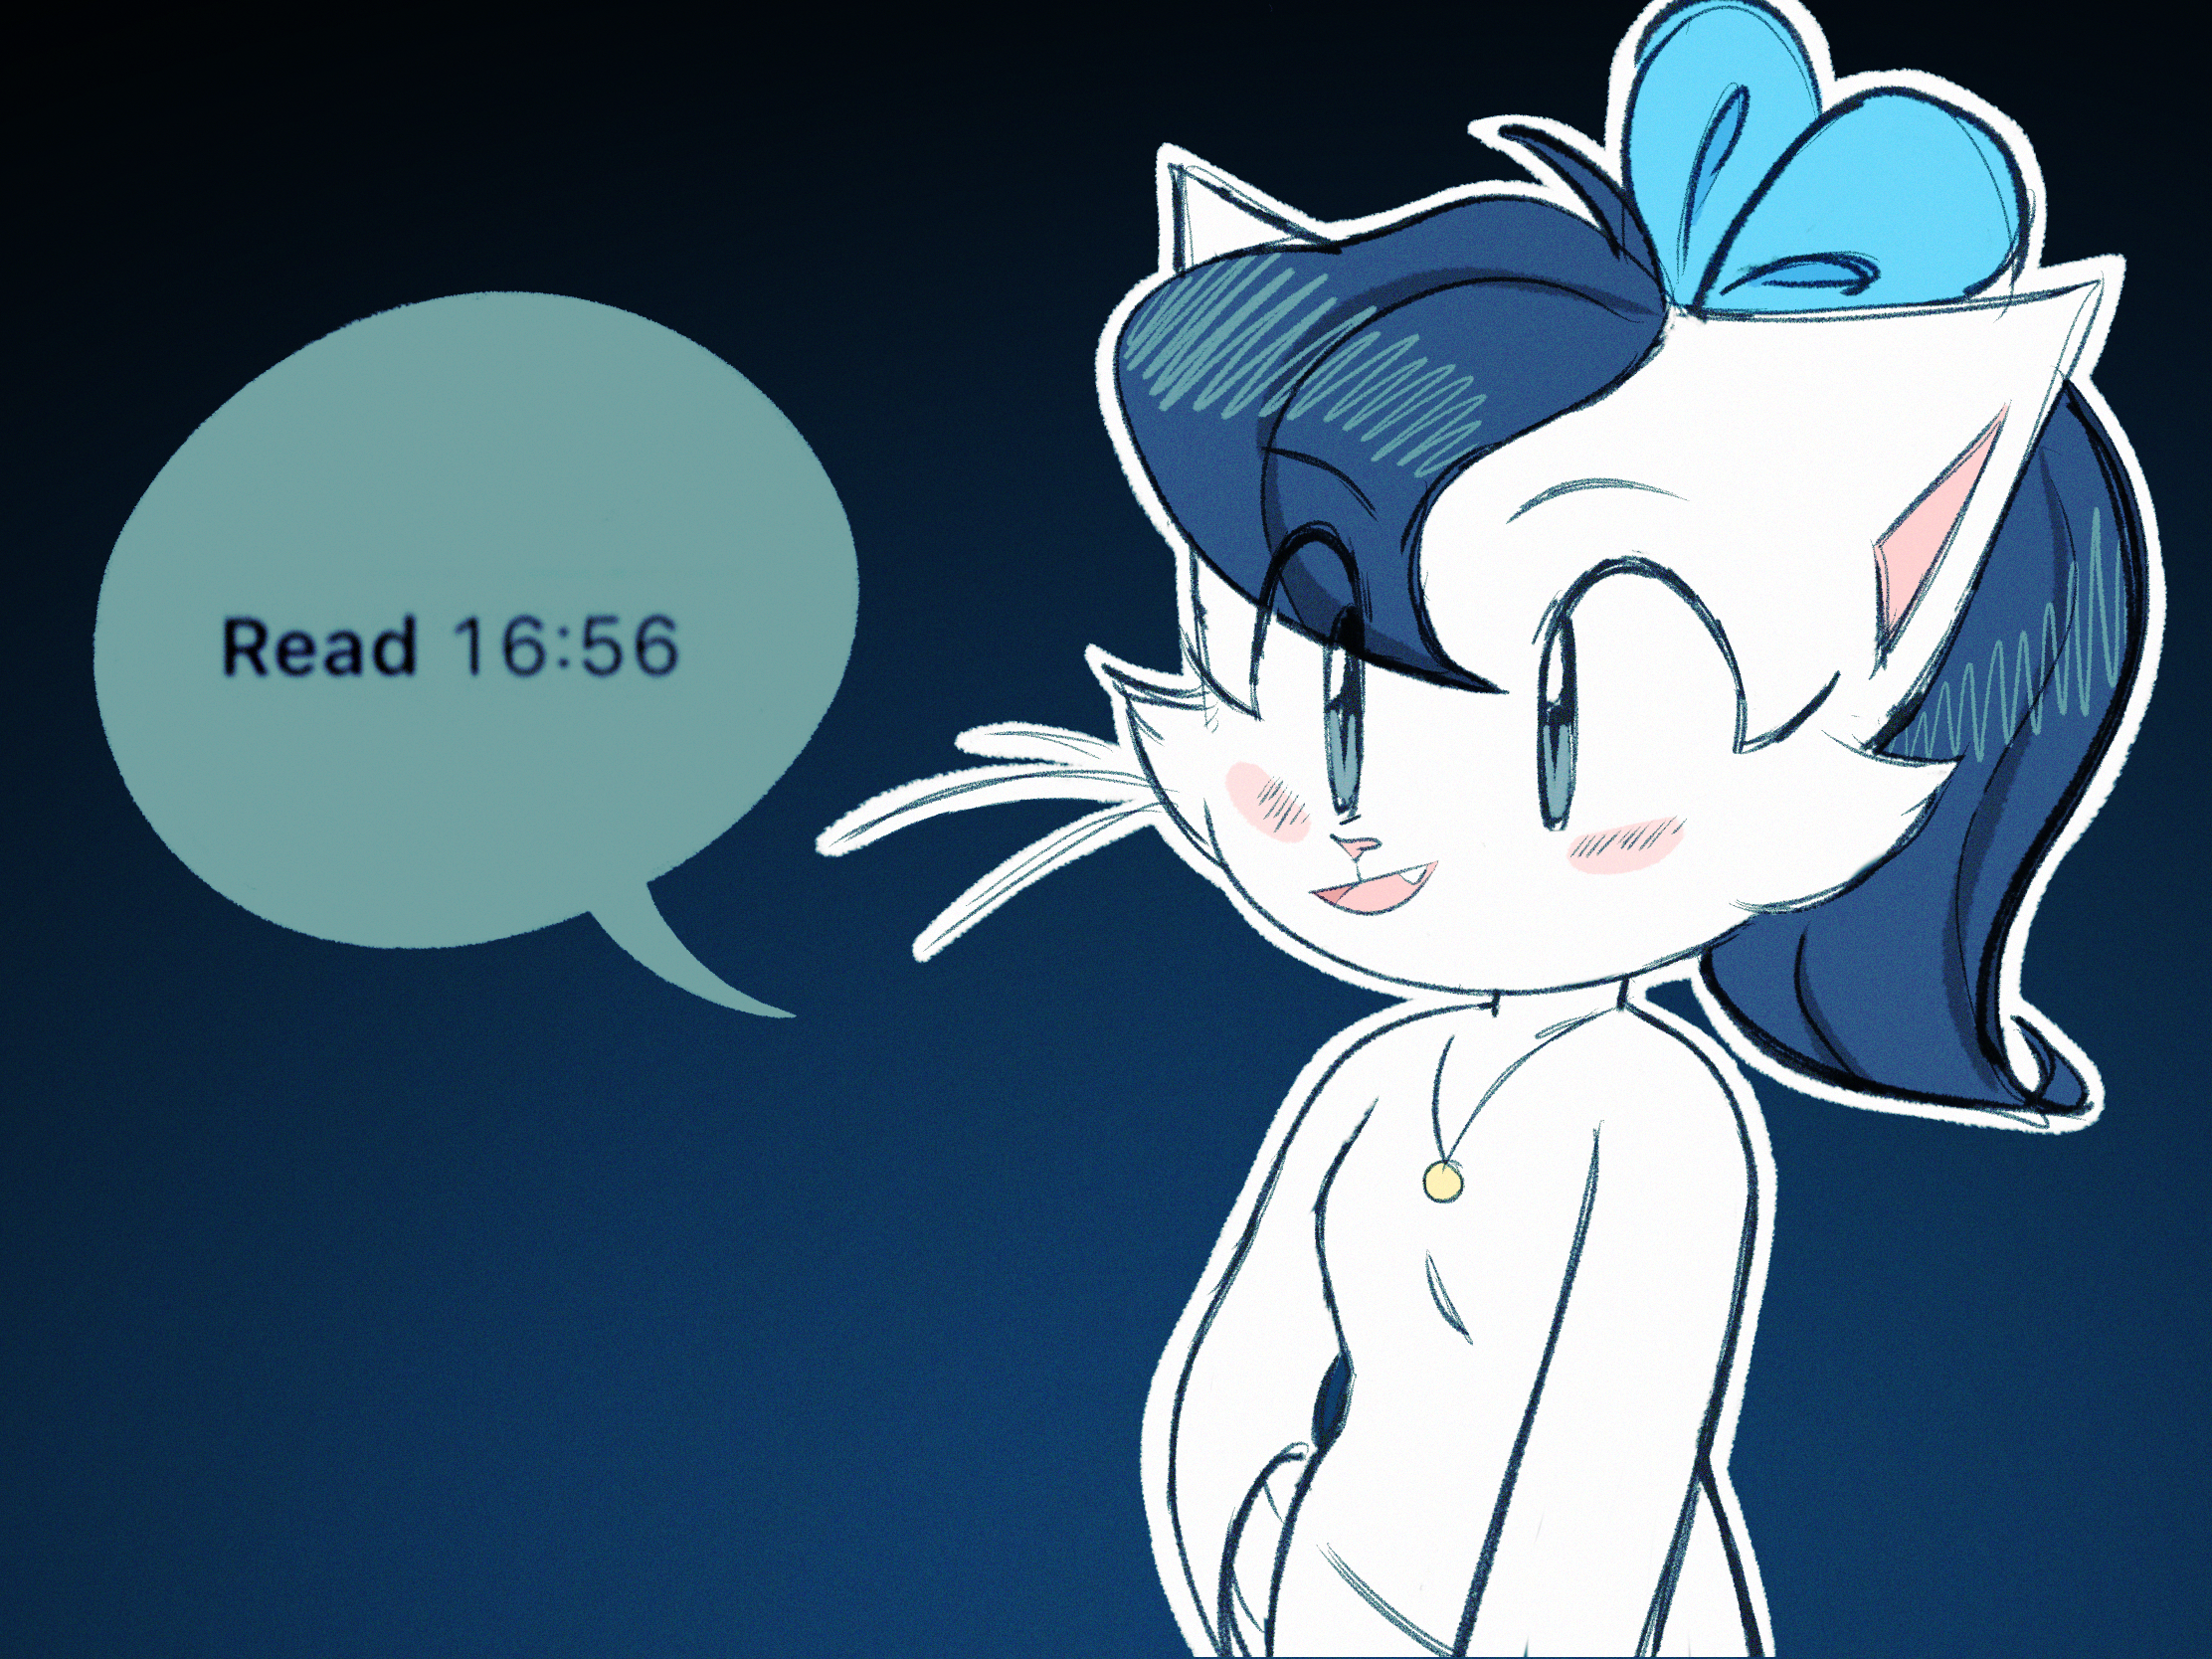 Candybooru image #13867, tagged with Chatot_(Artist) Sandy excellent